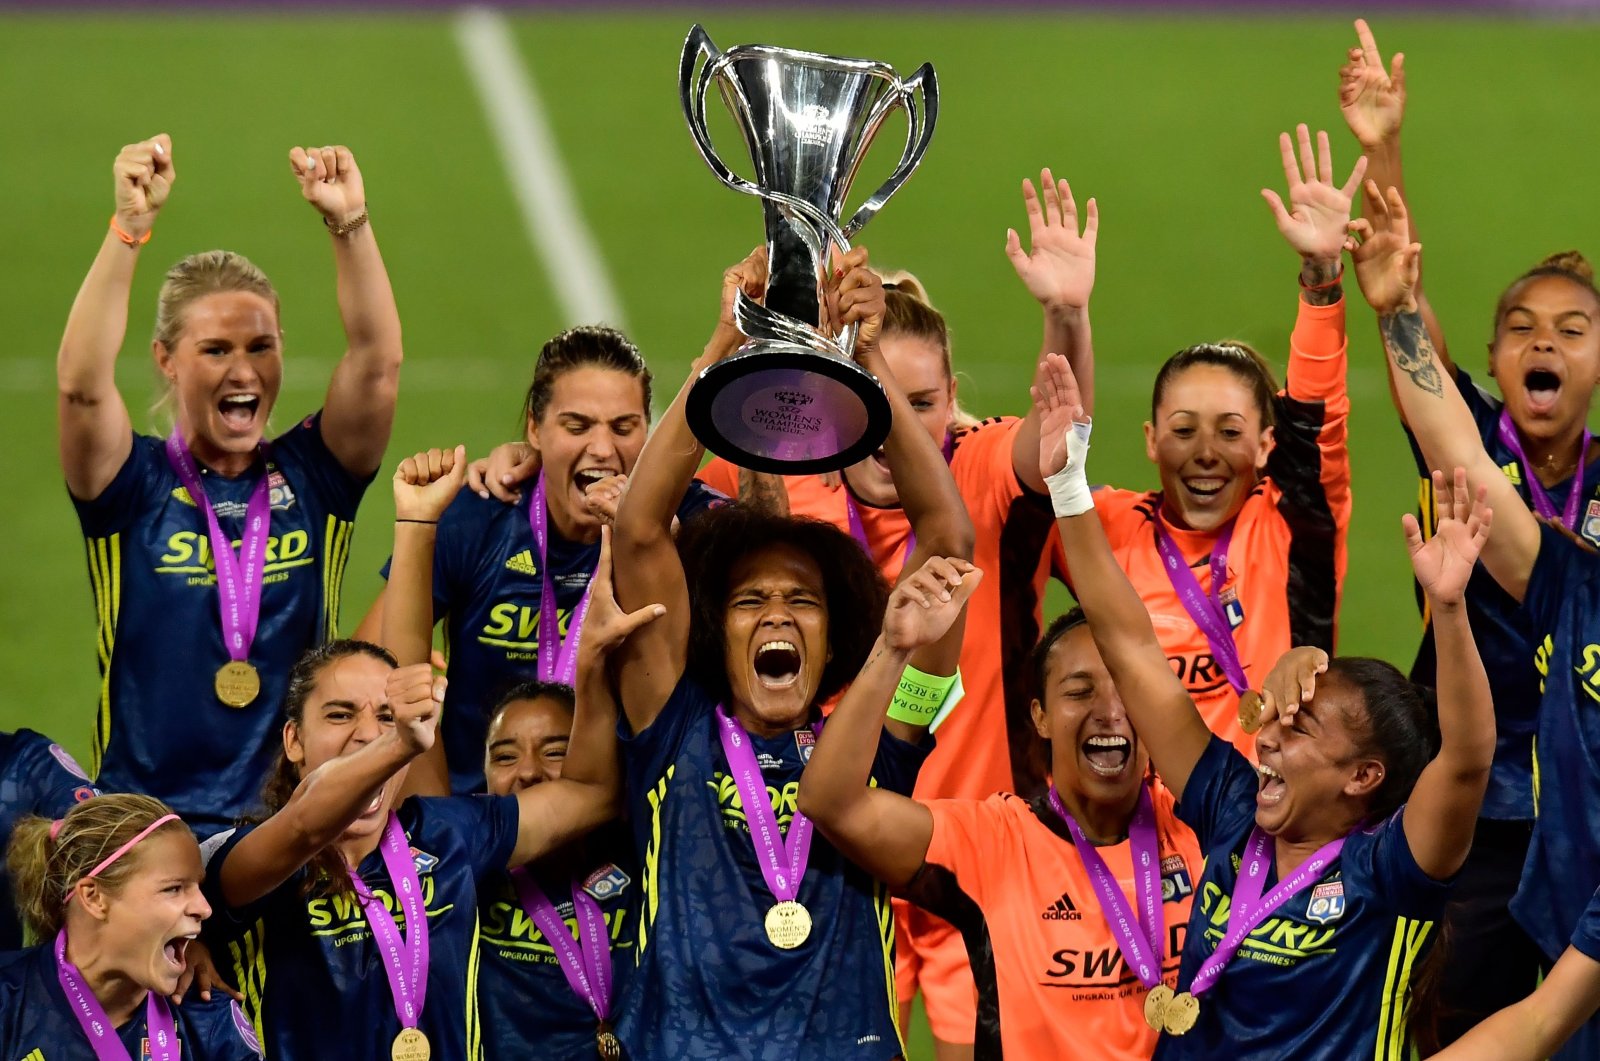 Lyon's Wendie Renard raises the trophy as she celebrates with teammates after winning the UEFA Women's Champions League final football match against Wolfsburg in San Sebastian, Spain, Aug. 30, 2020. (AFP Photo)